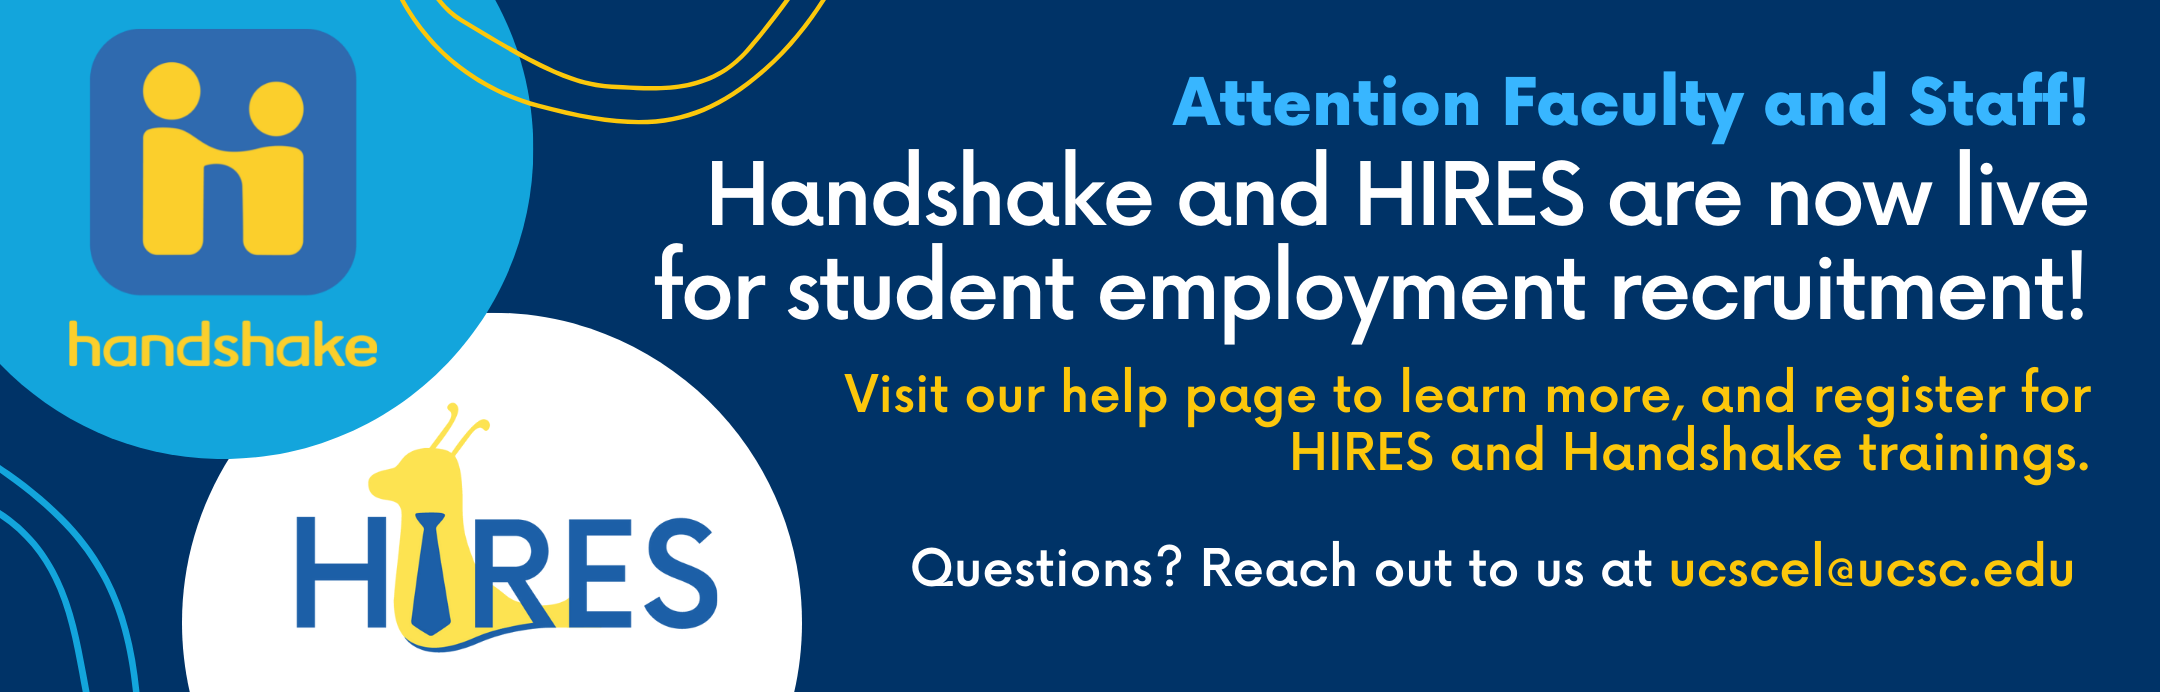 Attention Faculty and Staff! Handshake and HIRES are now live for student employment recruitment! Visit our help page to learn more, and register for HIRES and Handshake trainings. Questions? Reach out to us at ucscel@ucsc.edu 